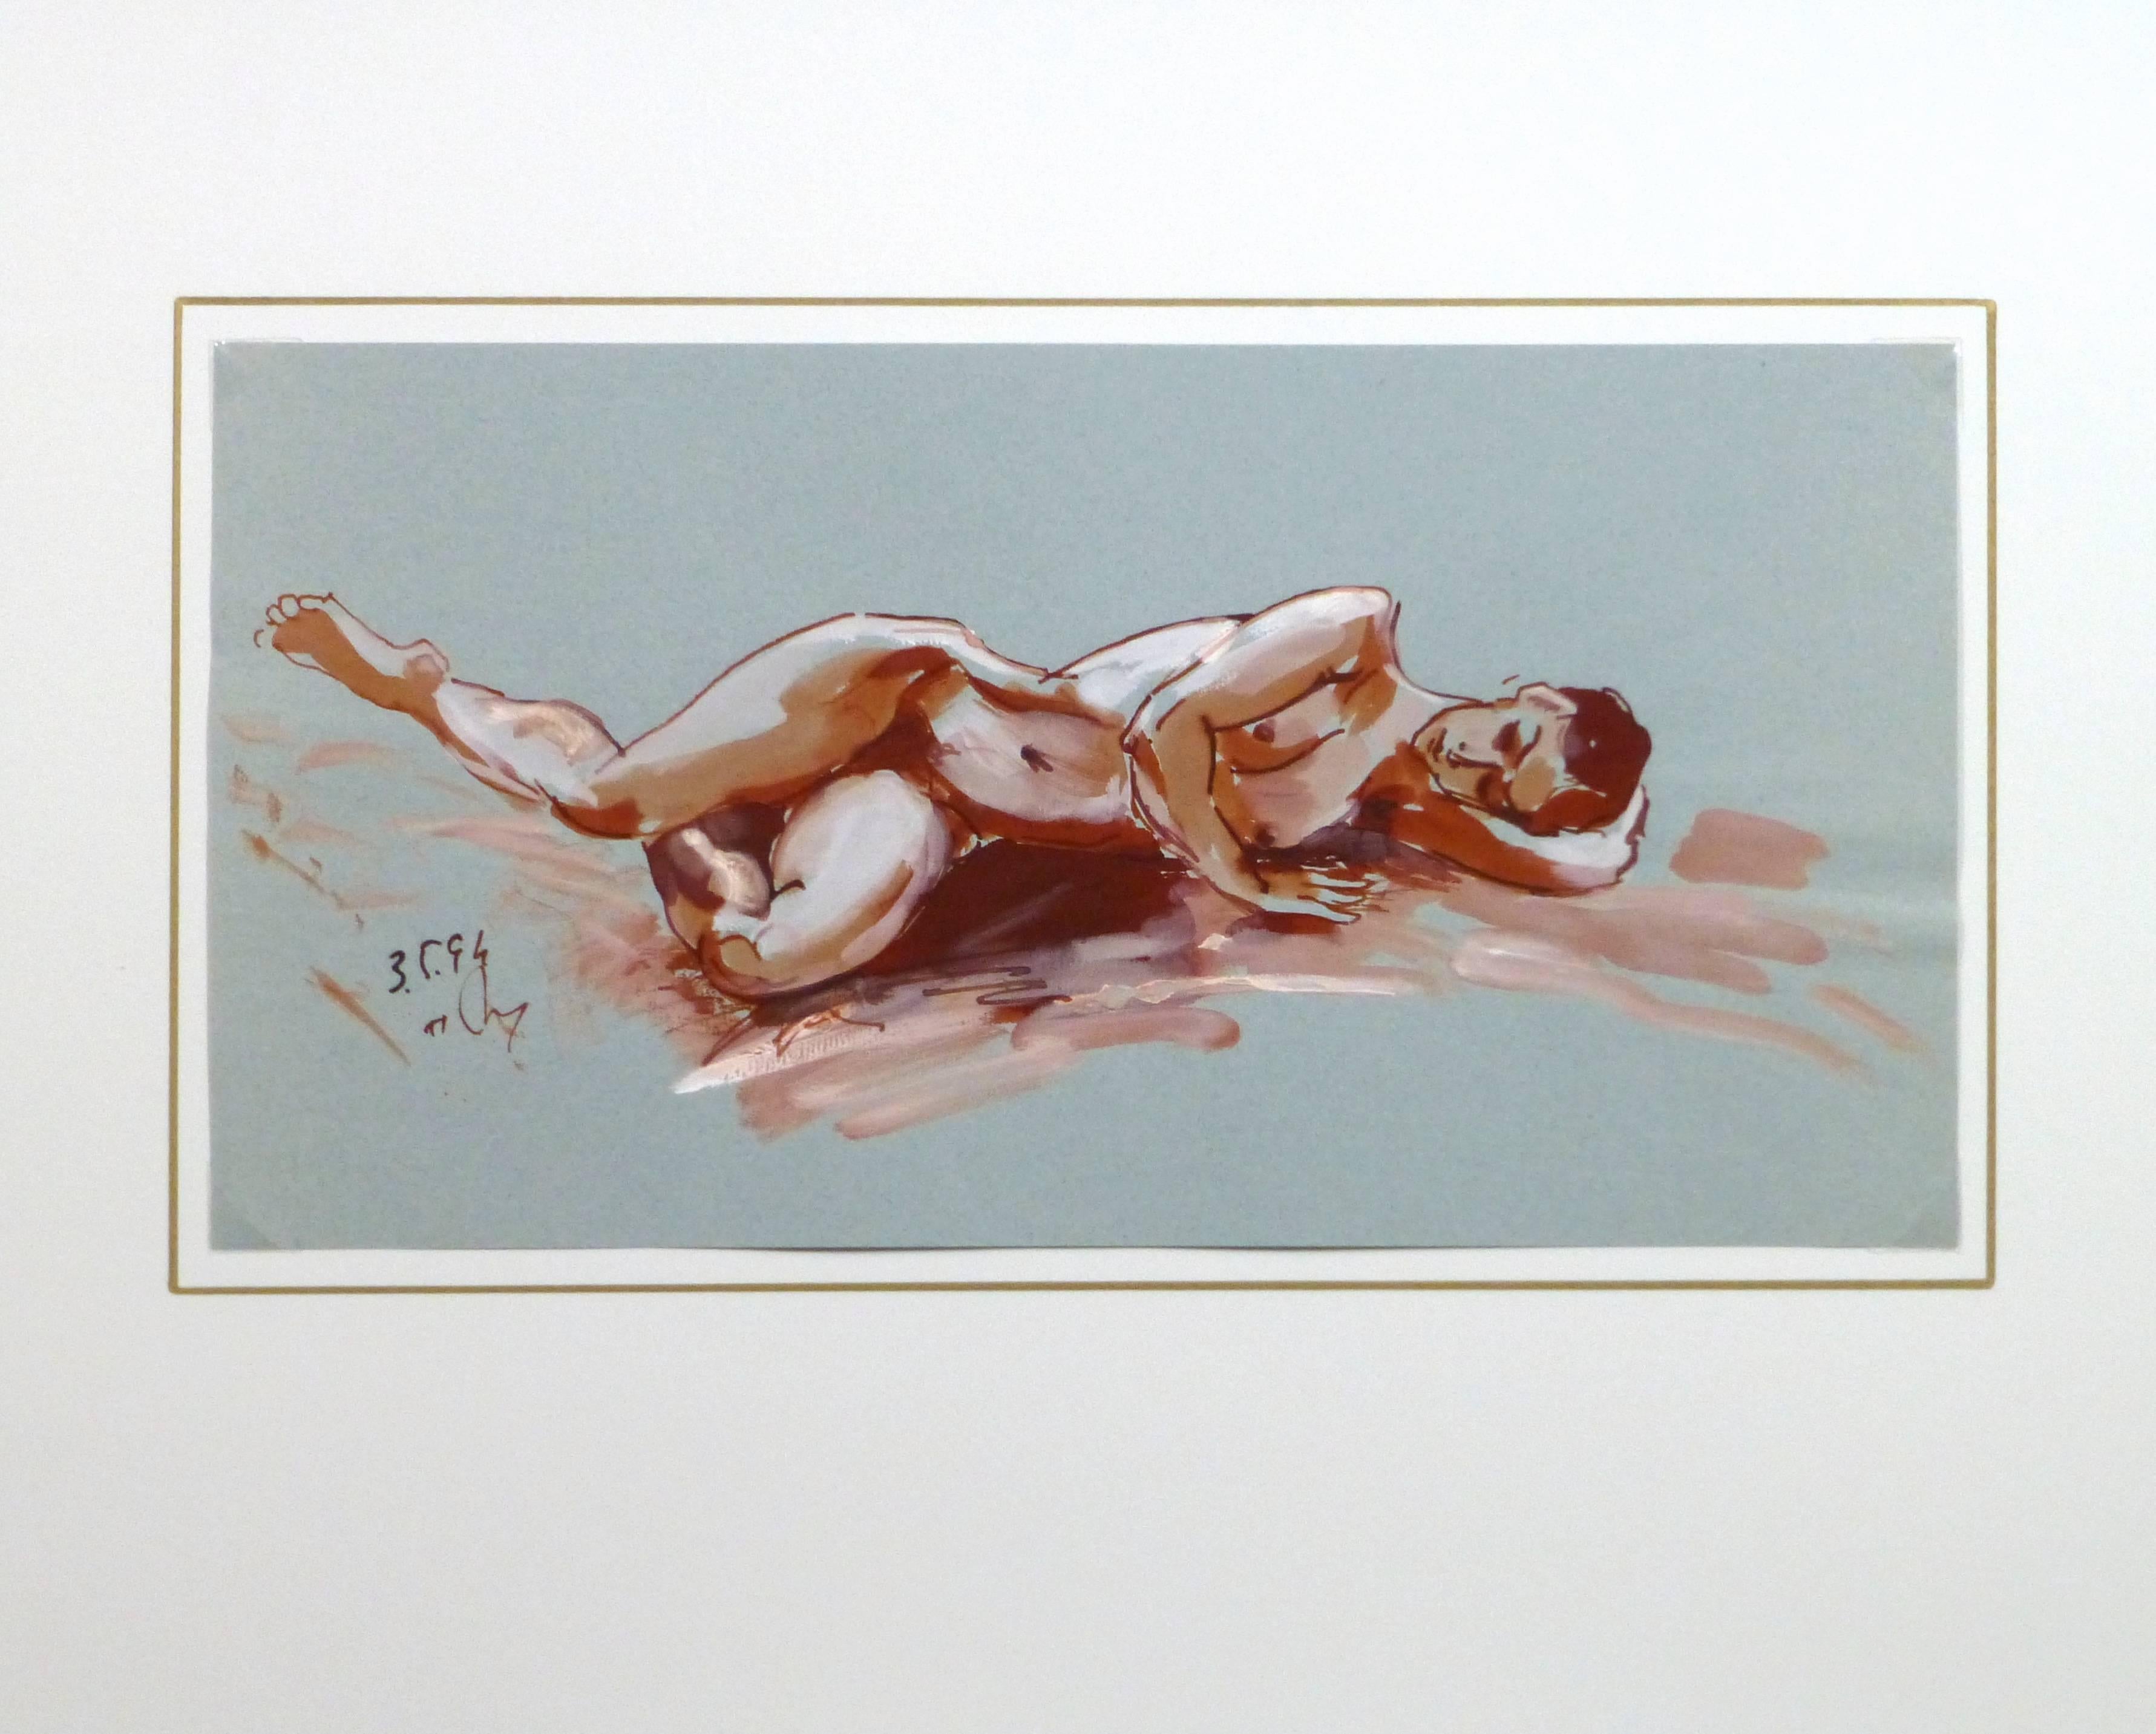 Striking watercolor and ink painting of a nude female figure lying on her side, in brilliant shades of red against blue paper by artist Kei Mitsuuchi, 1994. Signed and dated lower left. 

Original artwork on paper displayed on a white mat with a